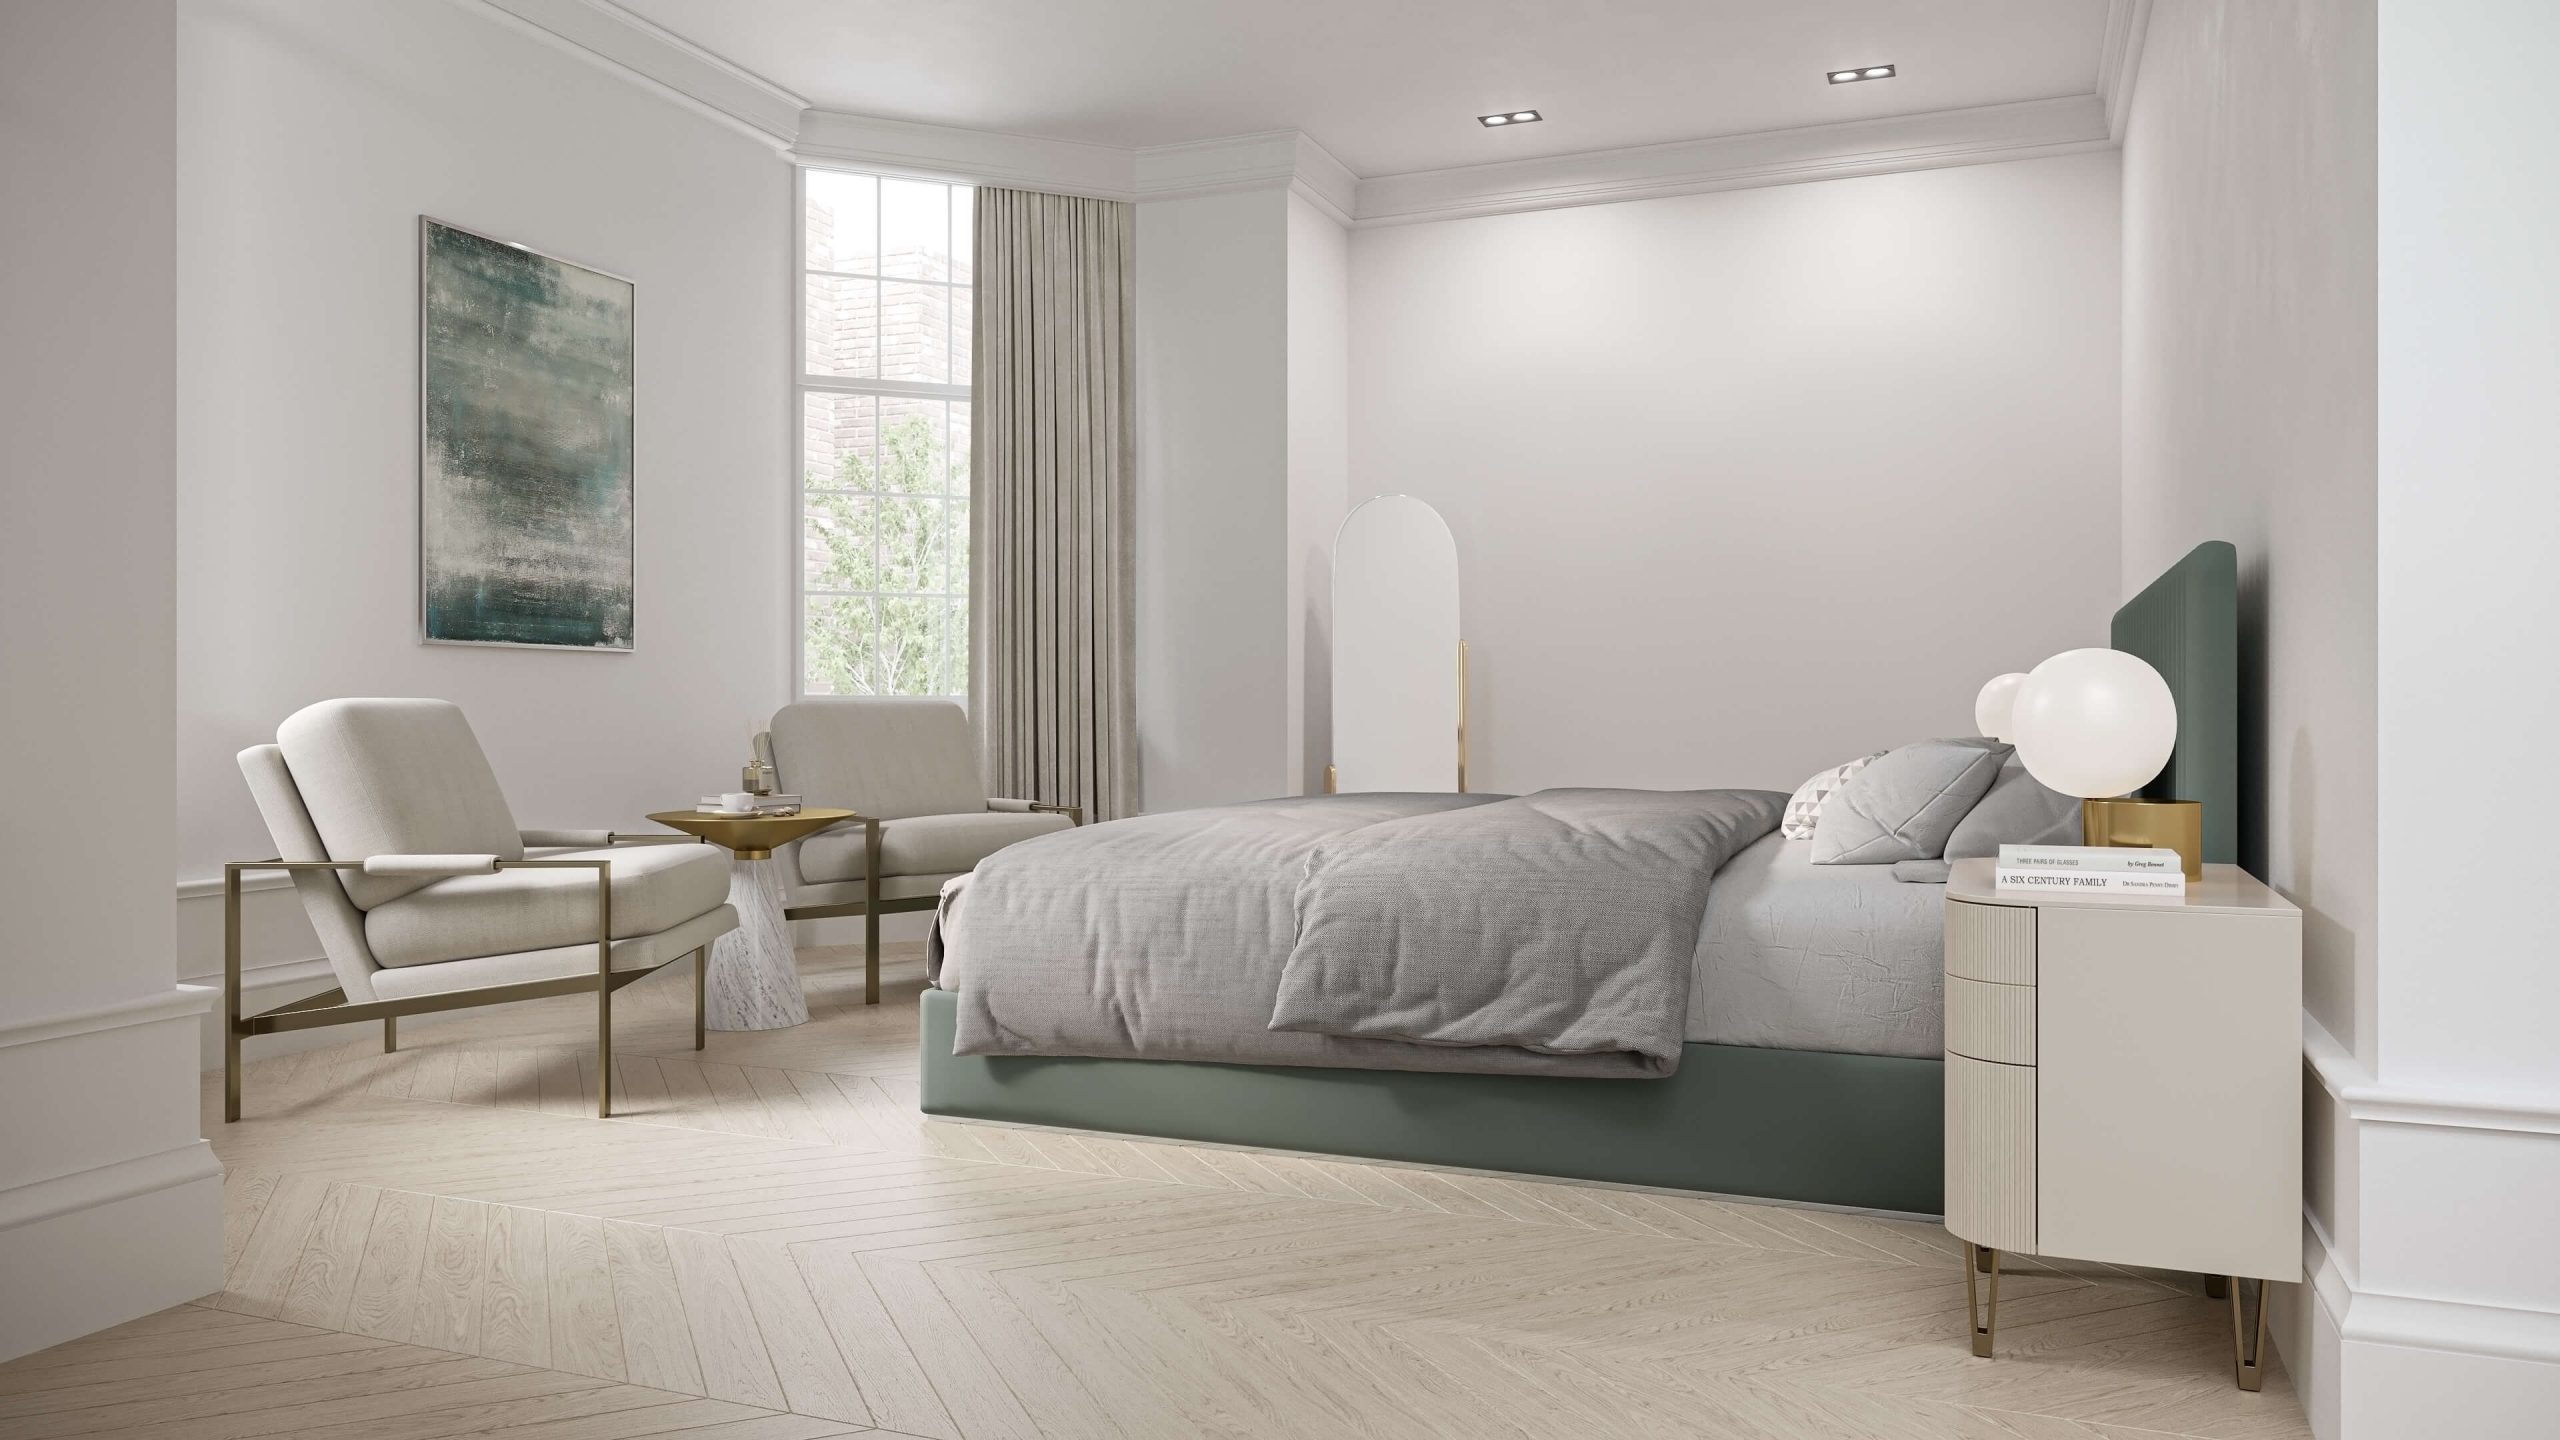 Main Bedroom Rendering for a Quebec real Estate Complex